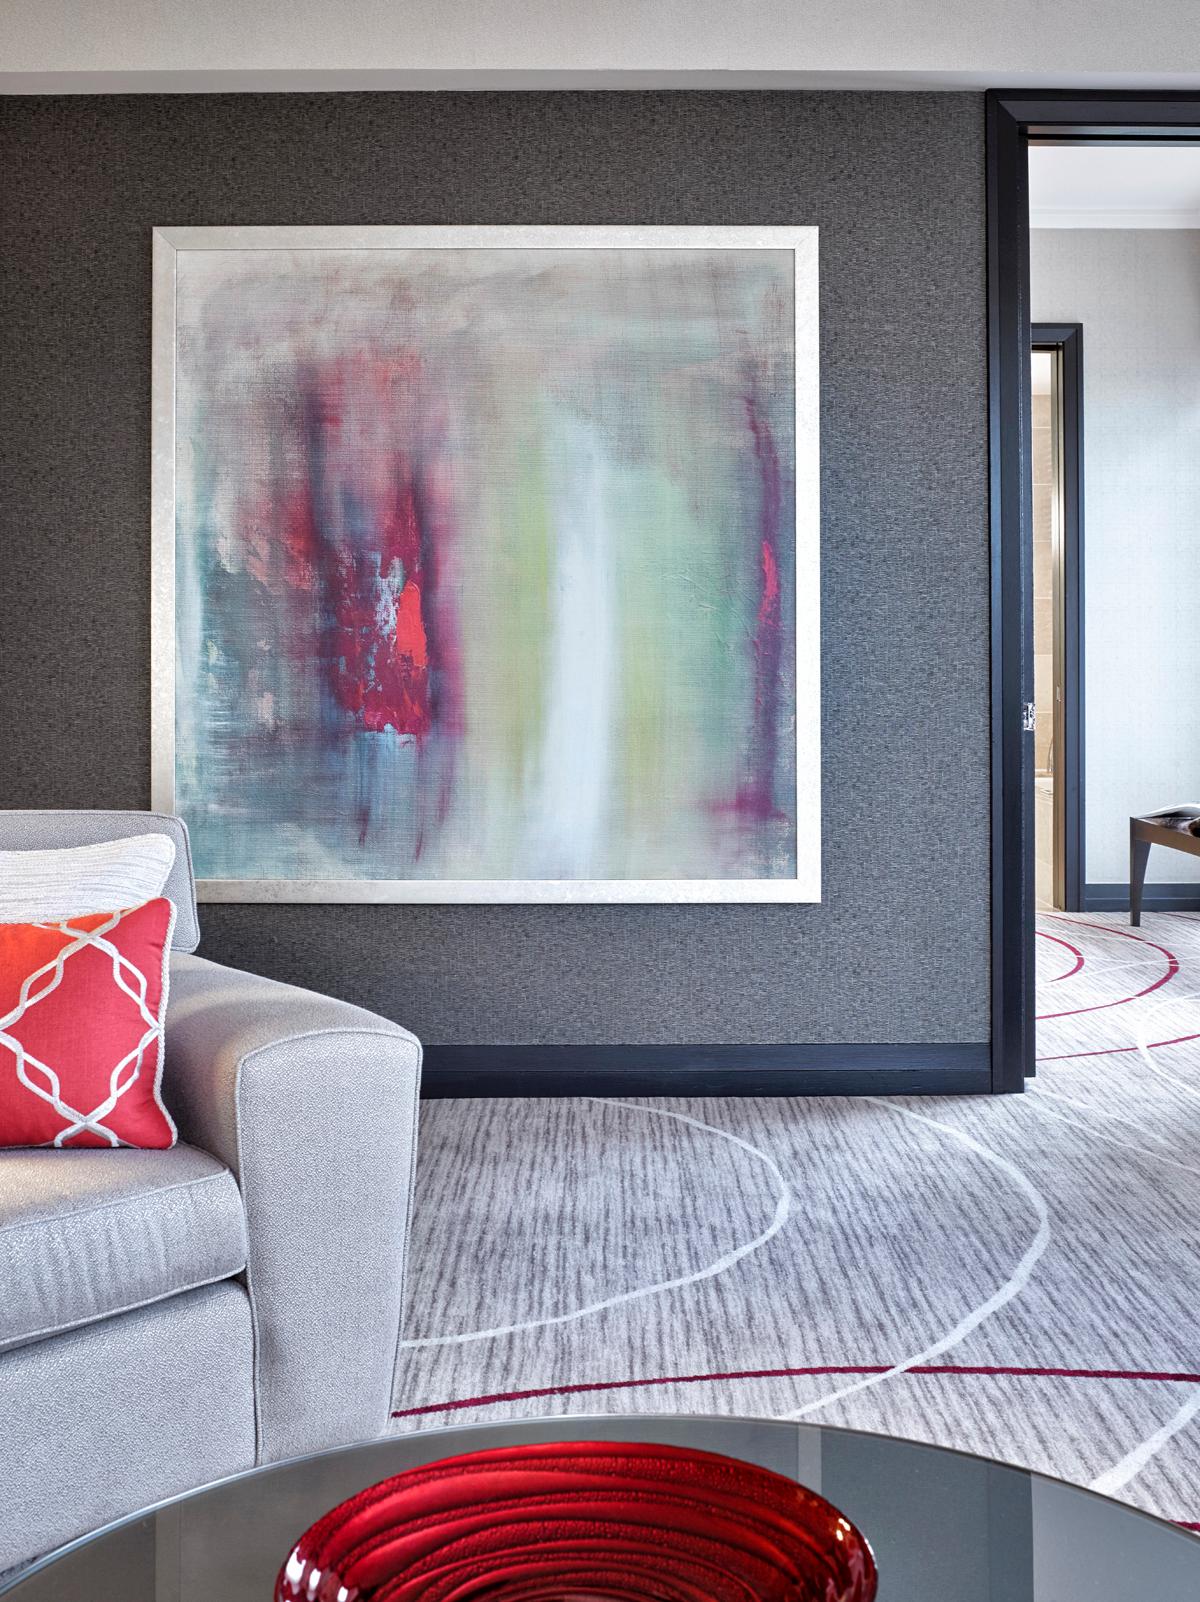 Complementing the suites’ modern interiors is a contemporary art collection curated by Rare Culture which draws inspiration from New York City / HOK